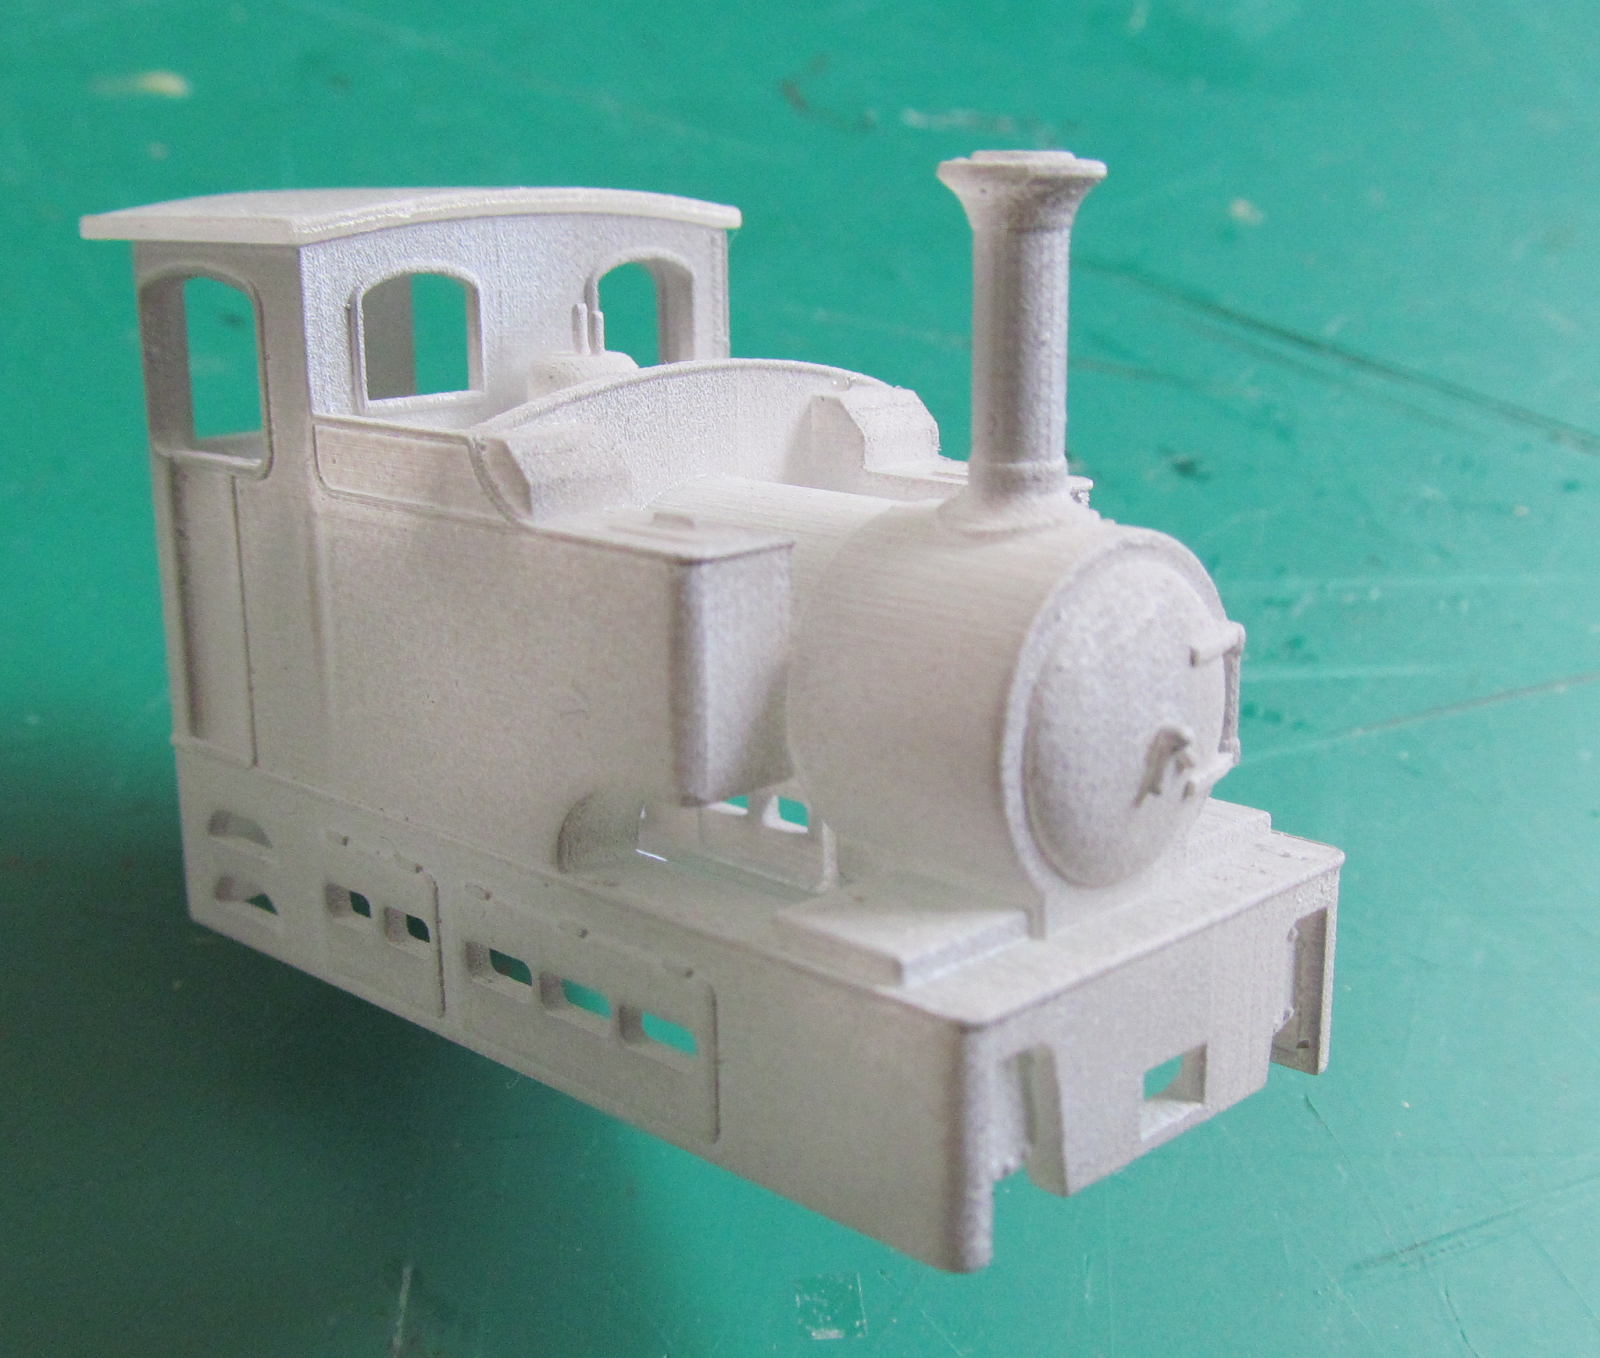 009 ONE PIECE 3D PRINTED BODYSHELL NO 110 RAILBUS WITH ROOF RACK. 